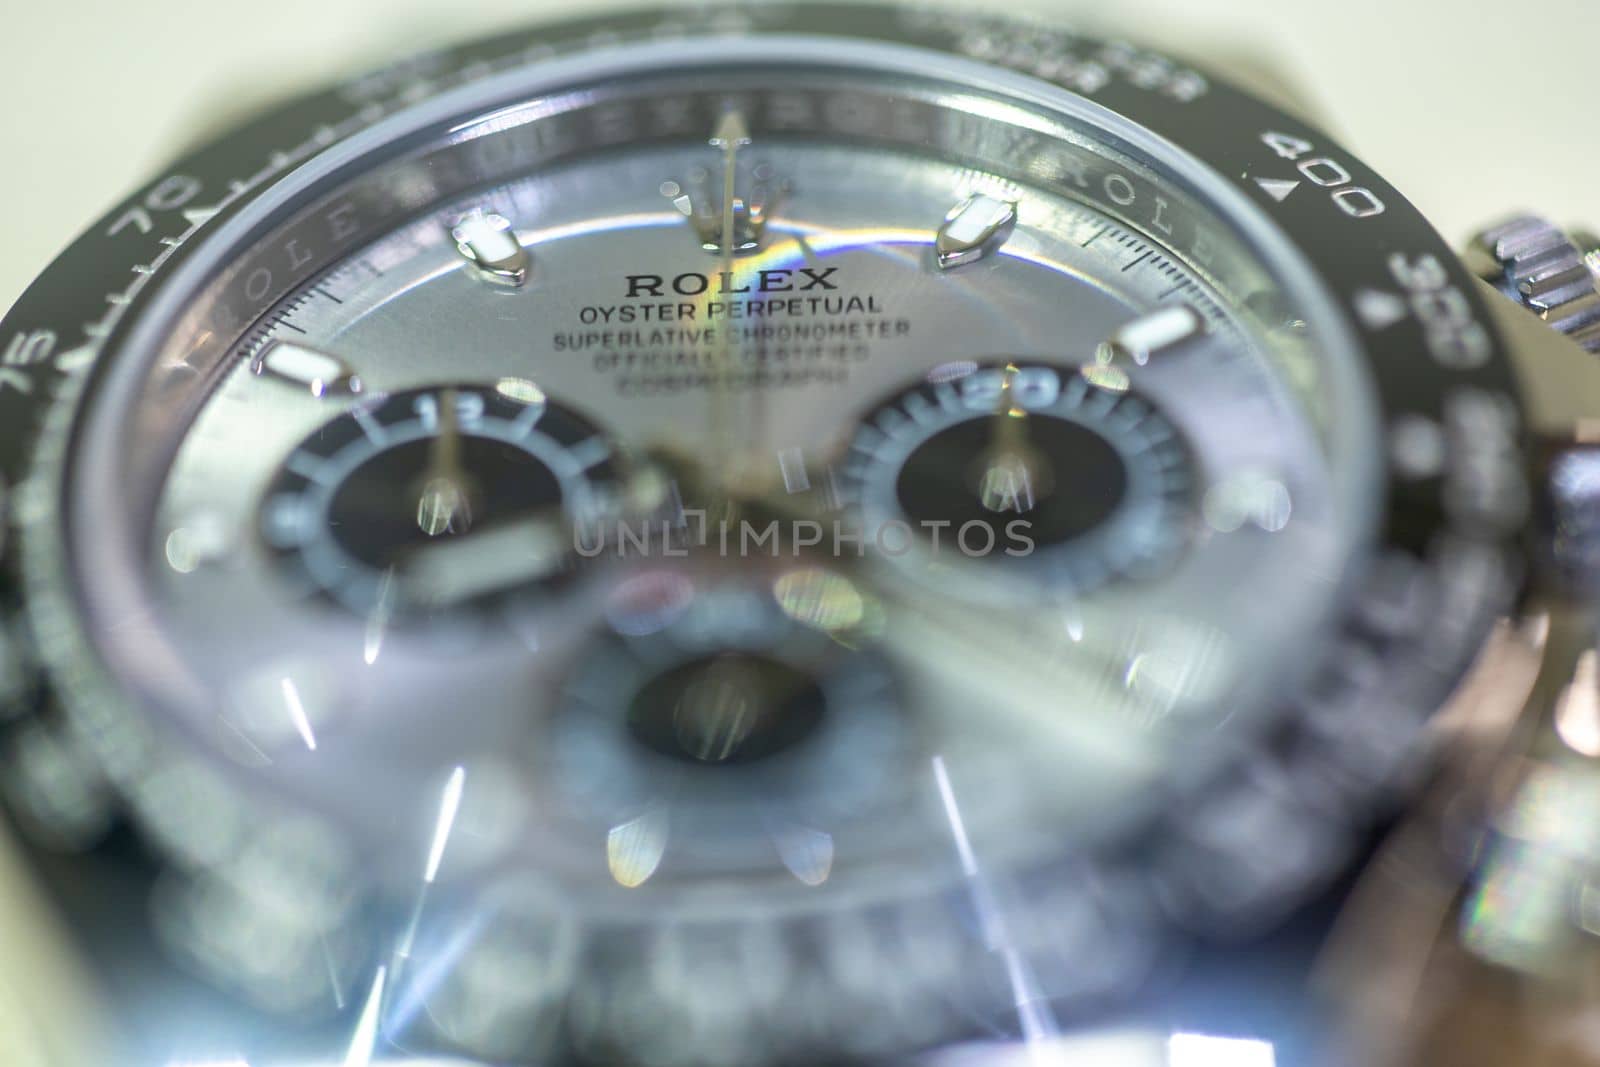 LJUBLJANA, SLOVENIA - December 12, 2021: Luxury watch Rolex Oyster Perpetual close up with selective focus. High quality photo